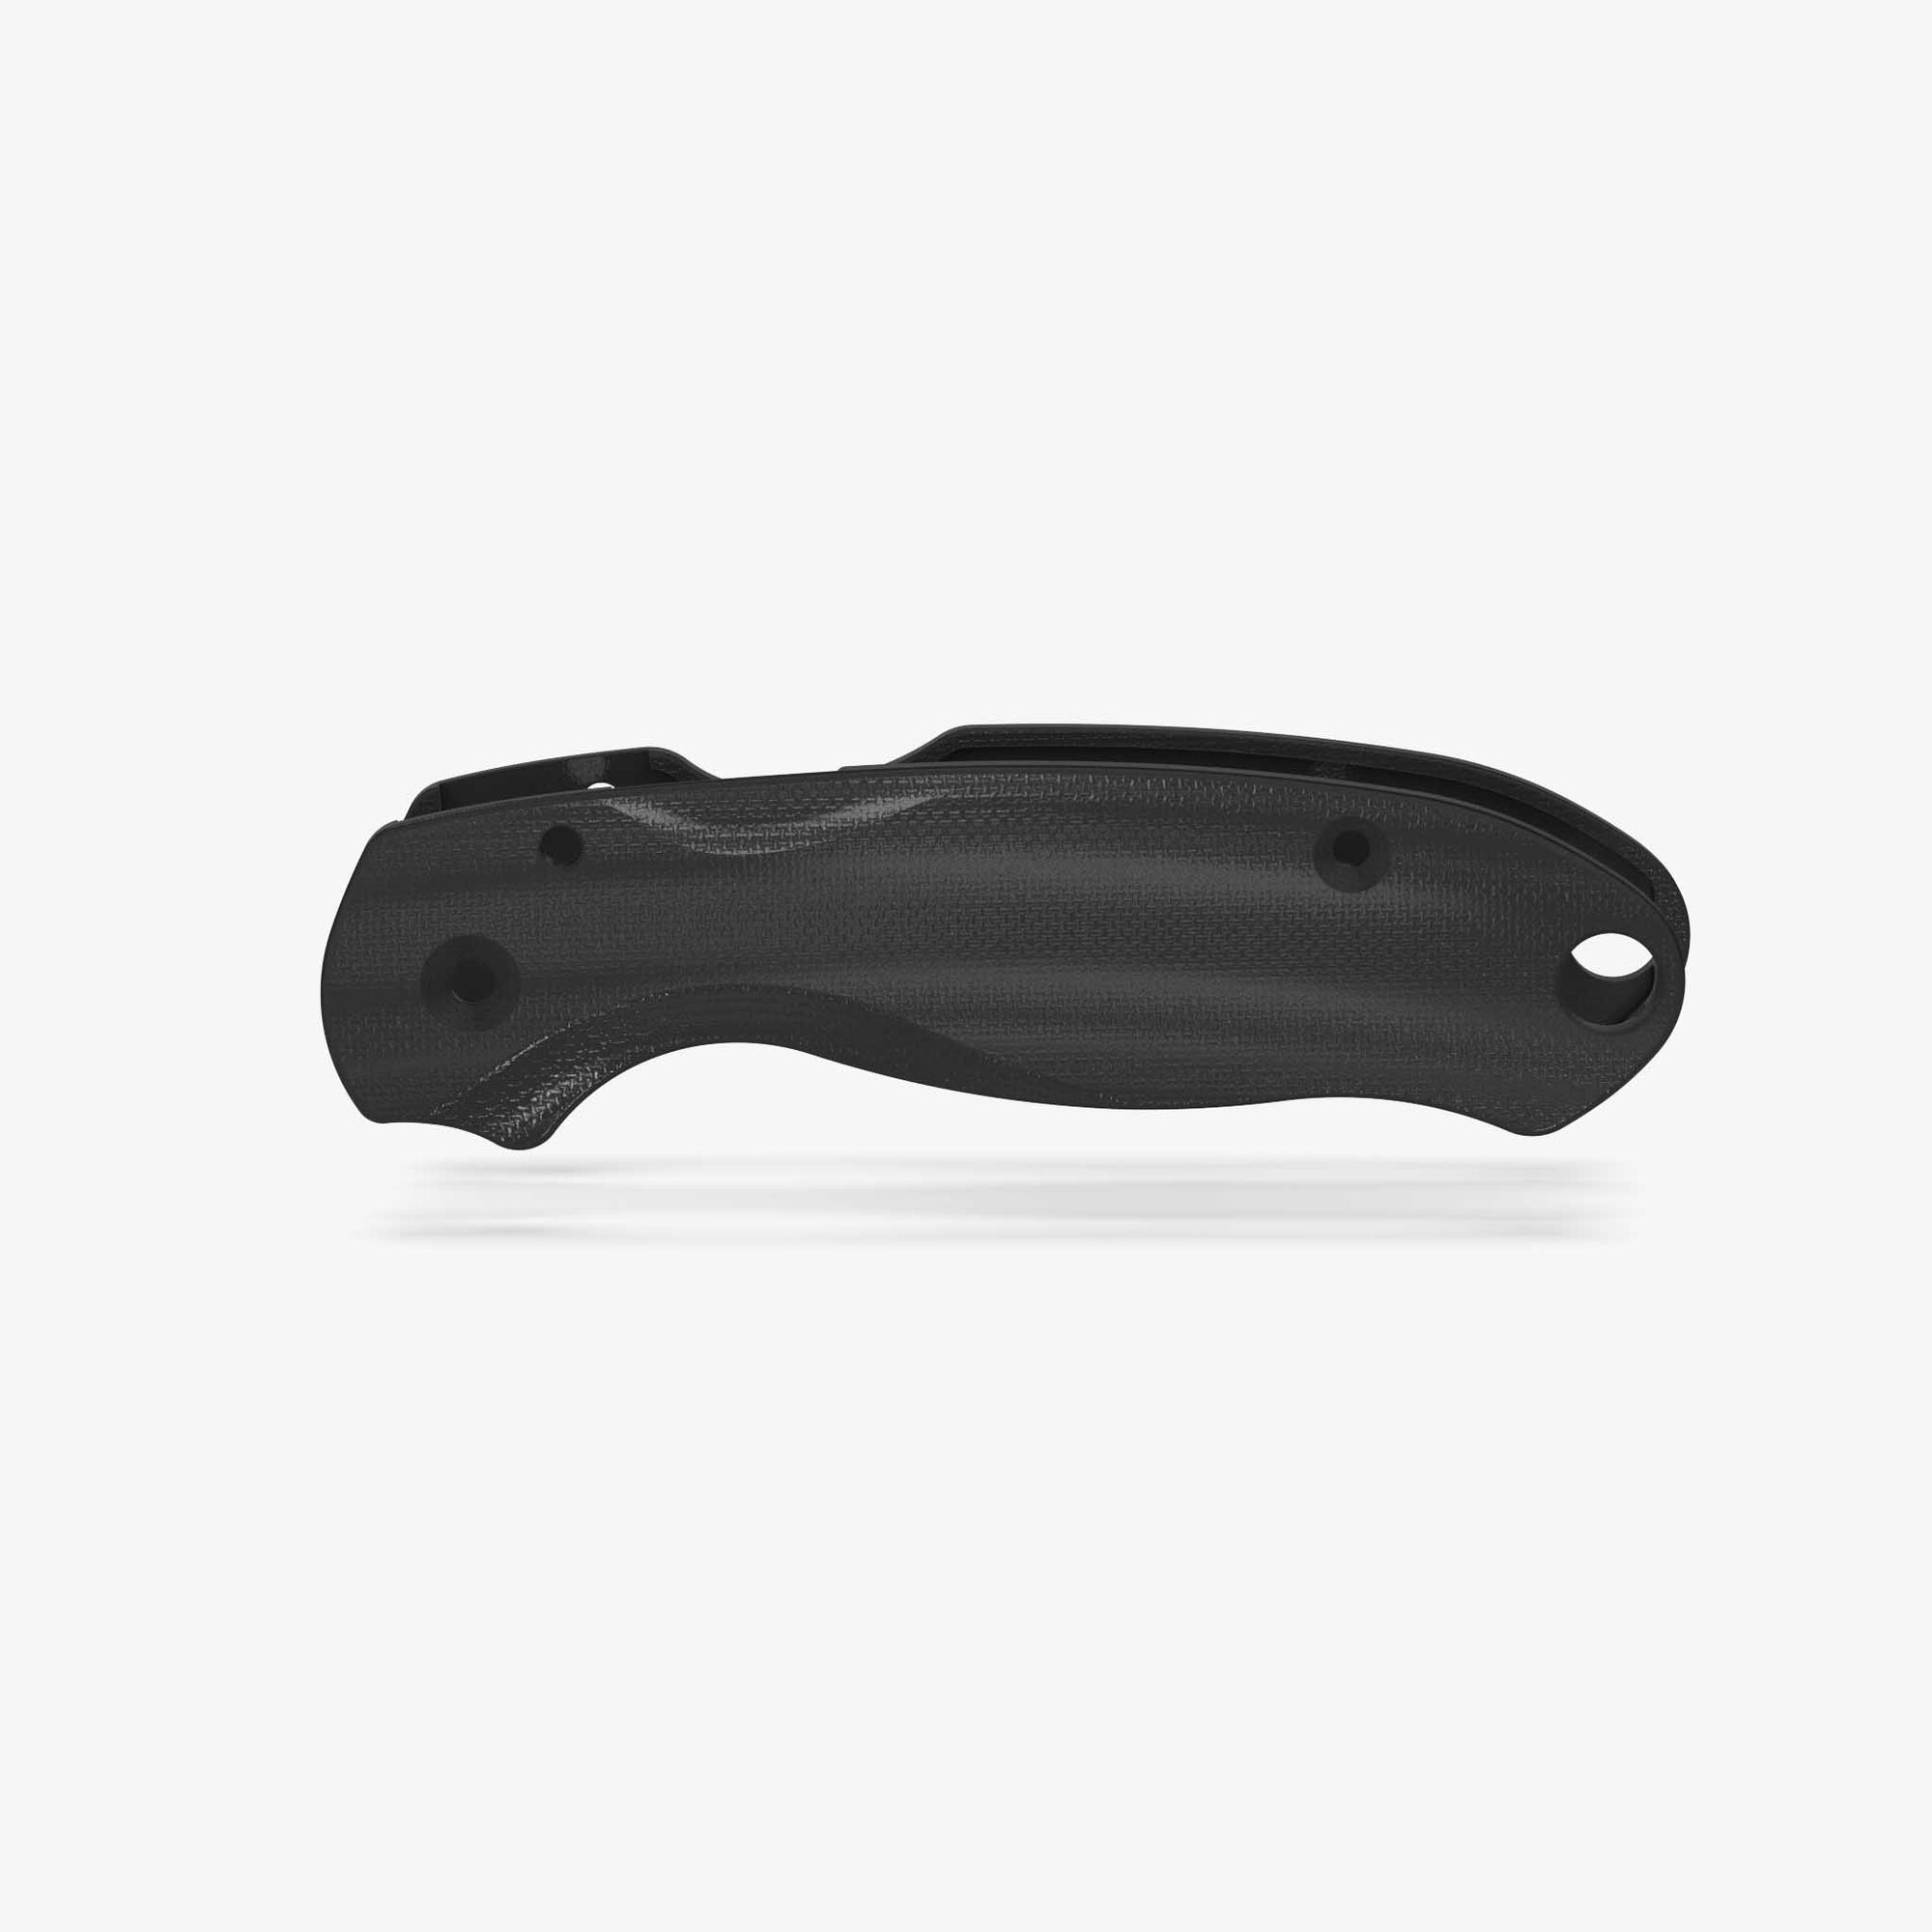 Lotus G-10 Scales for Spyderco Para 3 Knife-Pitch Black